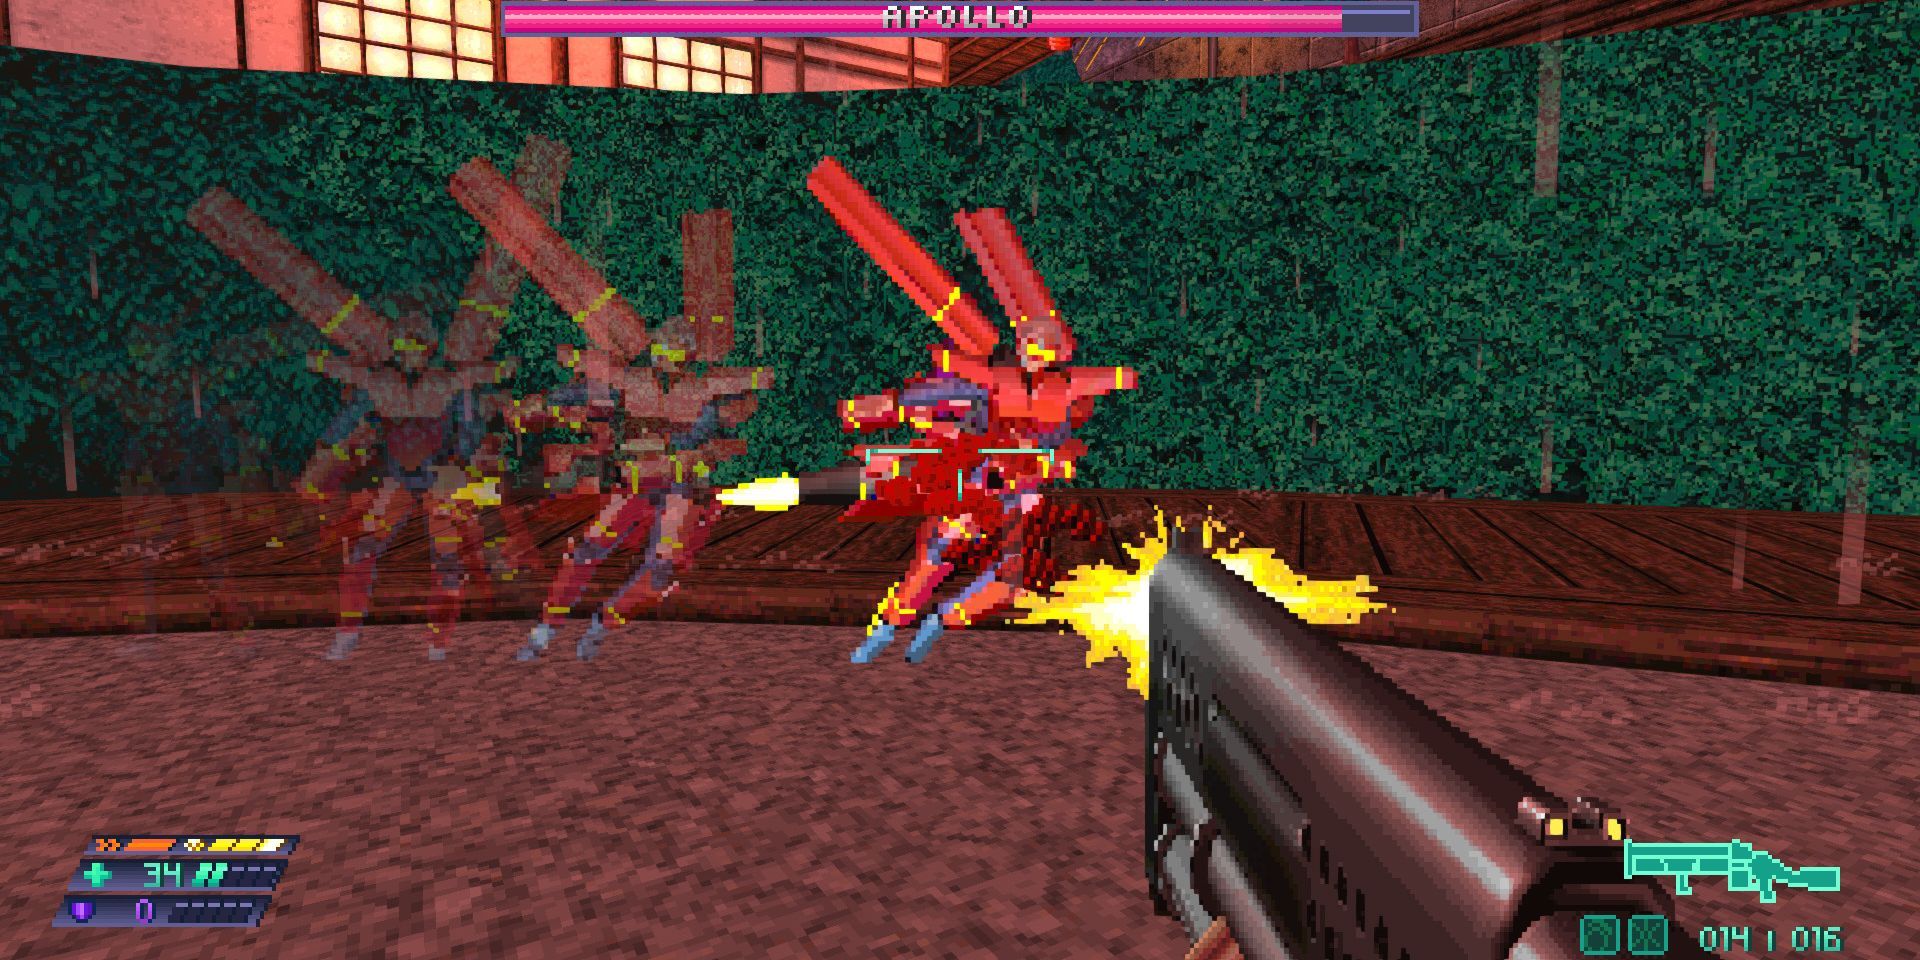 Bossfight with Apollo in Beyond Sunset